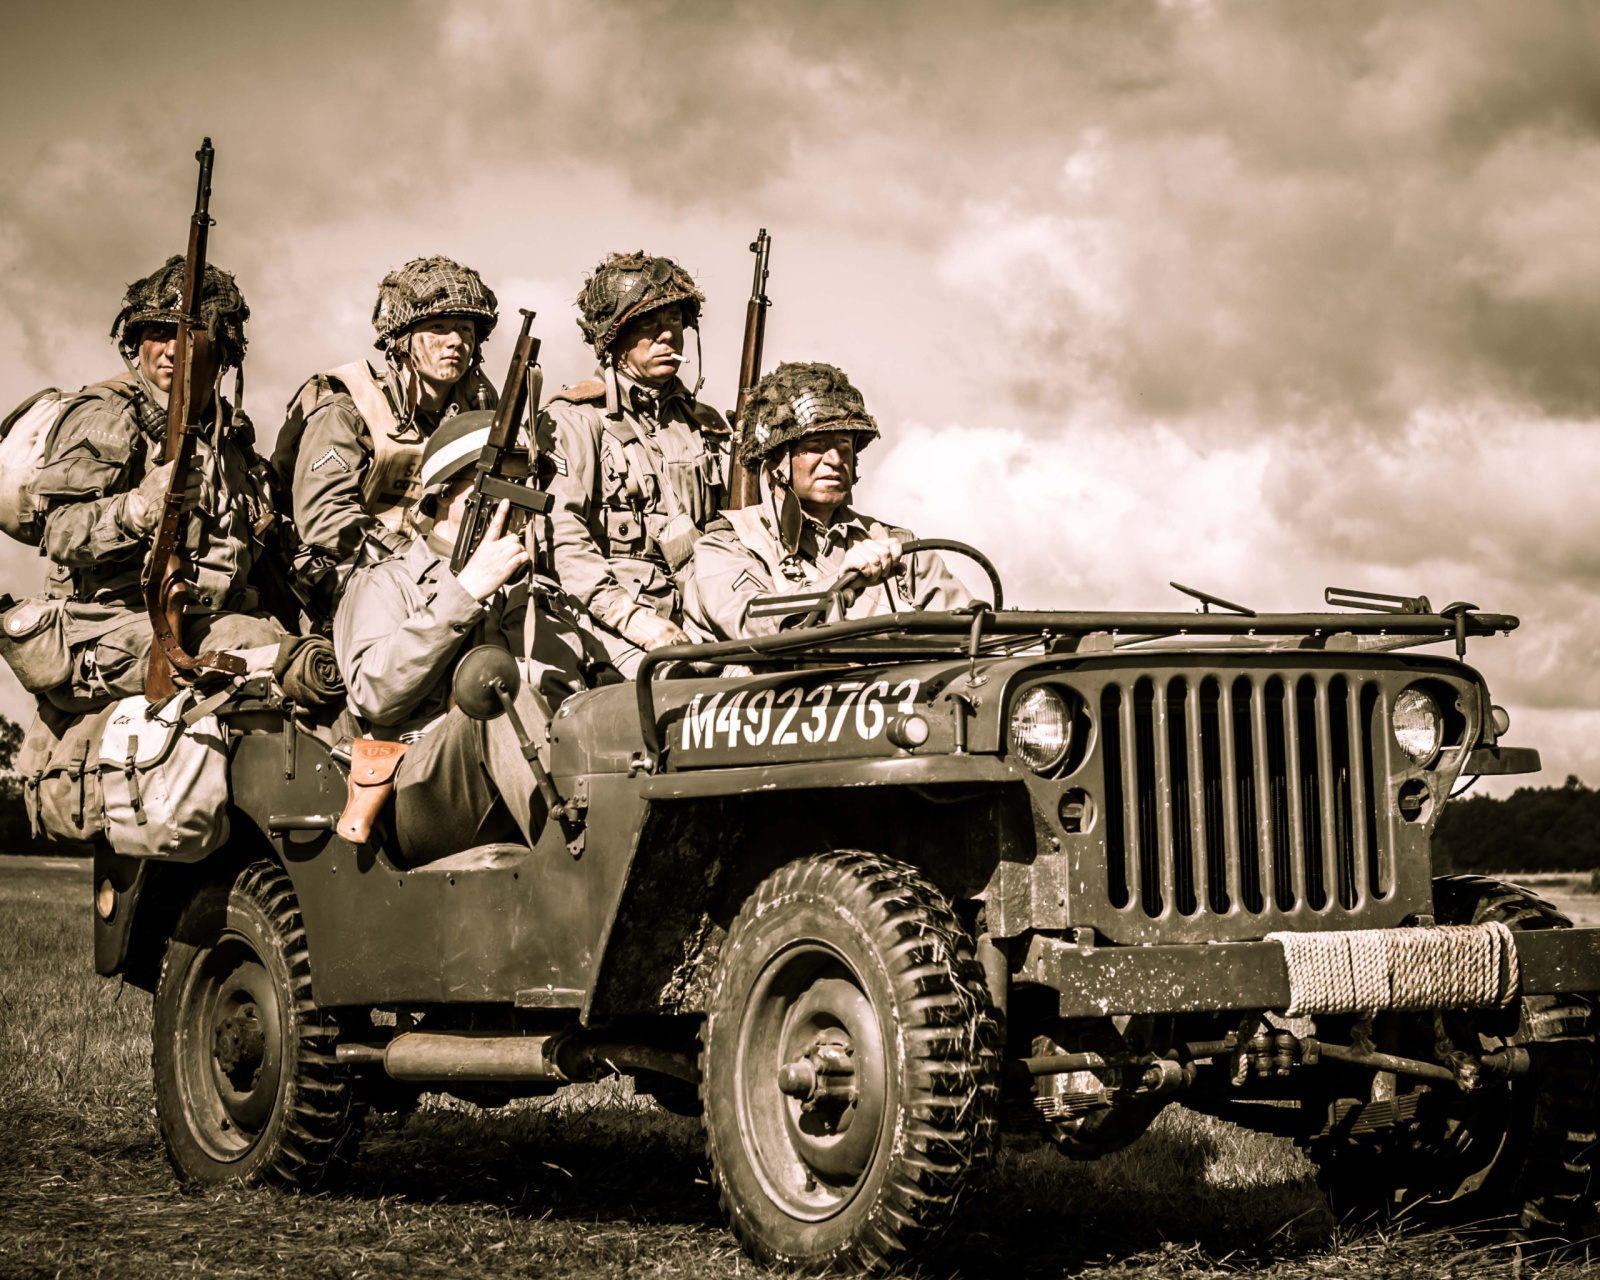 Soldiers on Jeep wallpaper 1600x1280